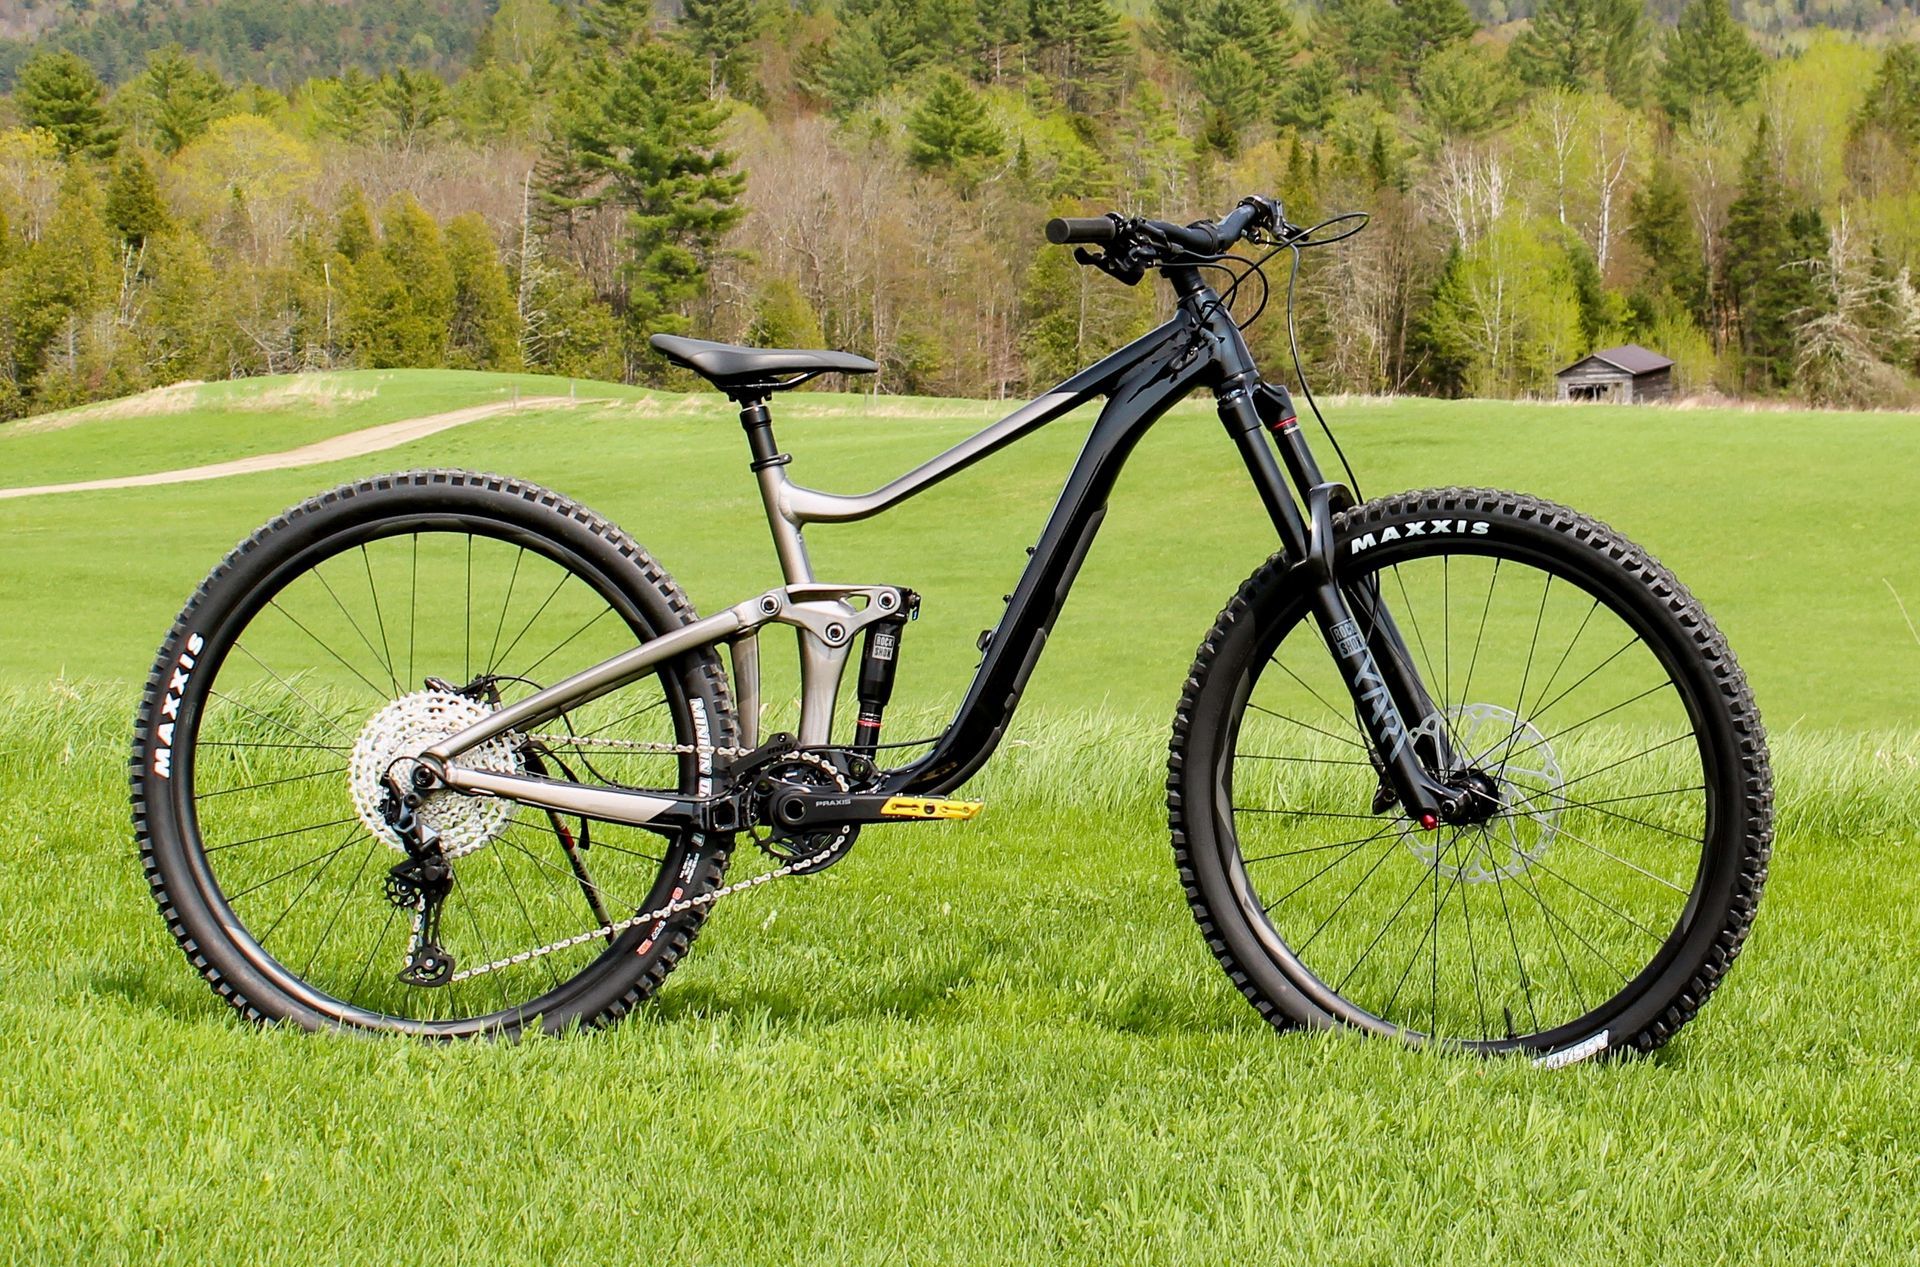 Black and grey aluminum Giant Reign 2 mountain bike in a field with woods in the background